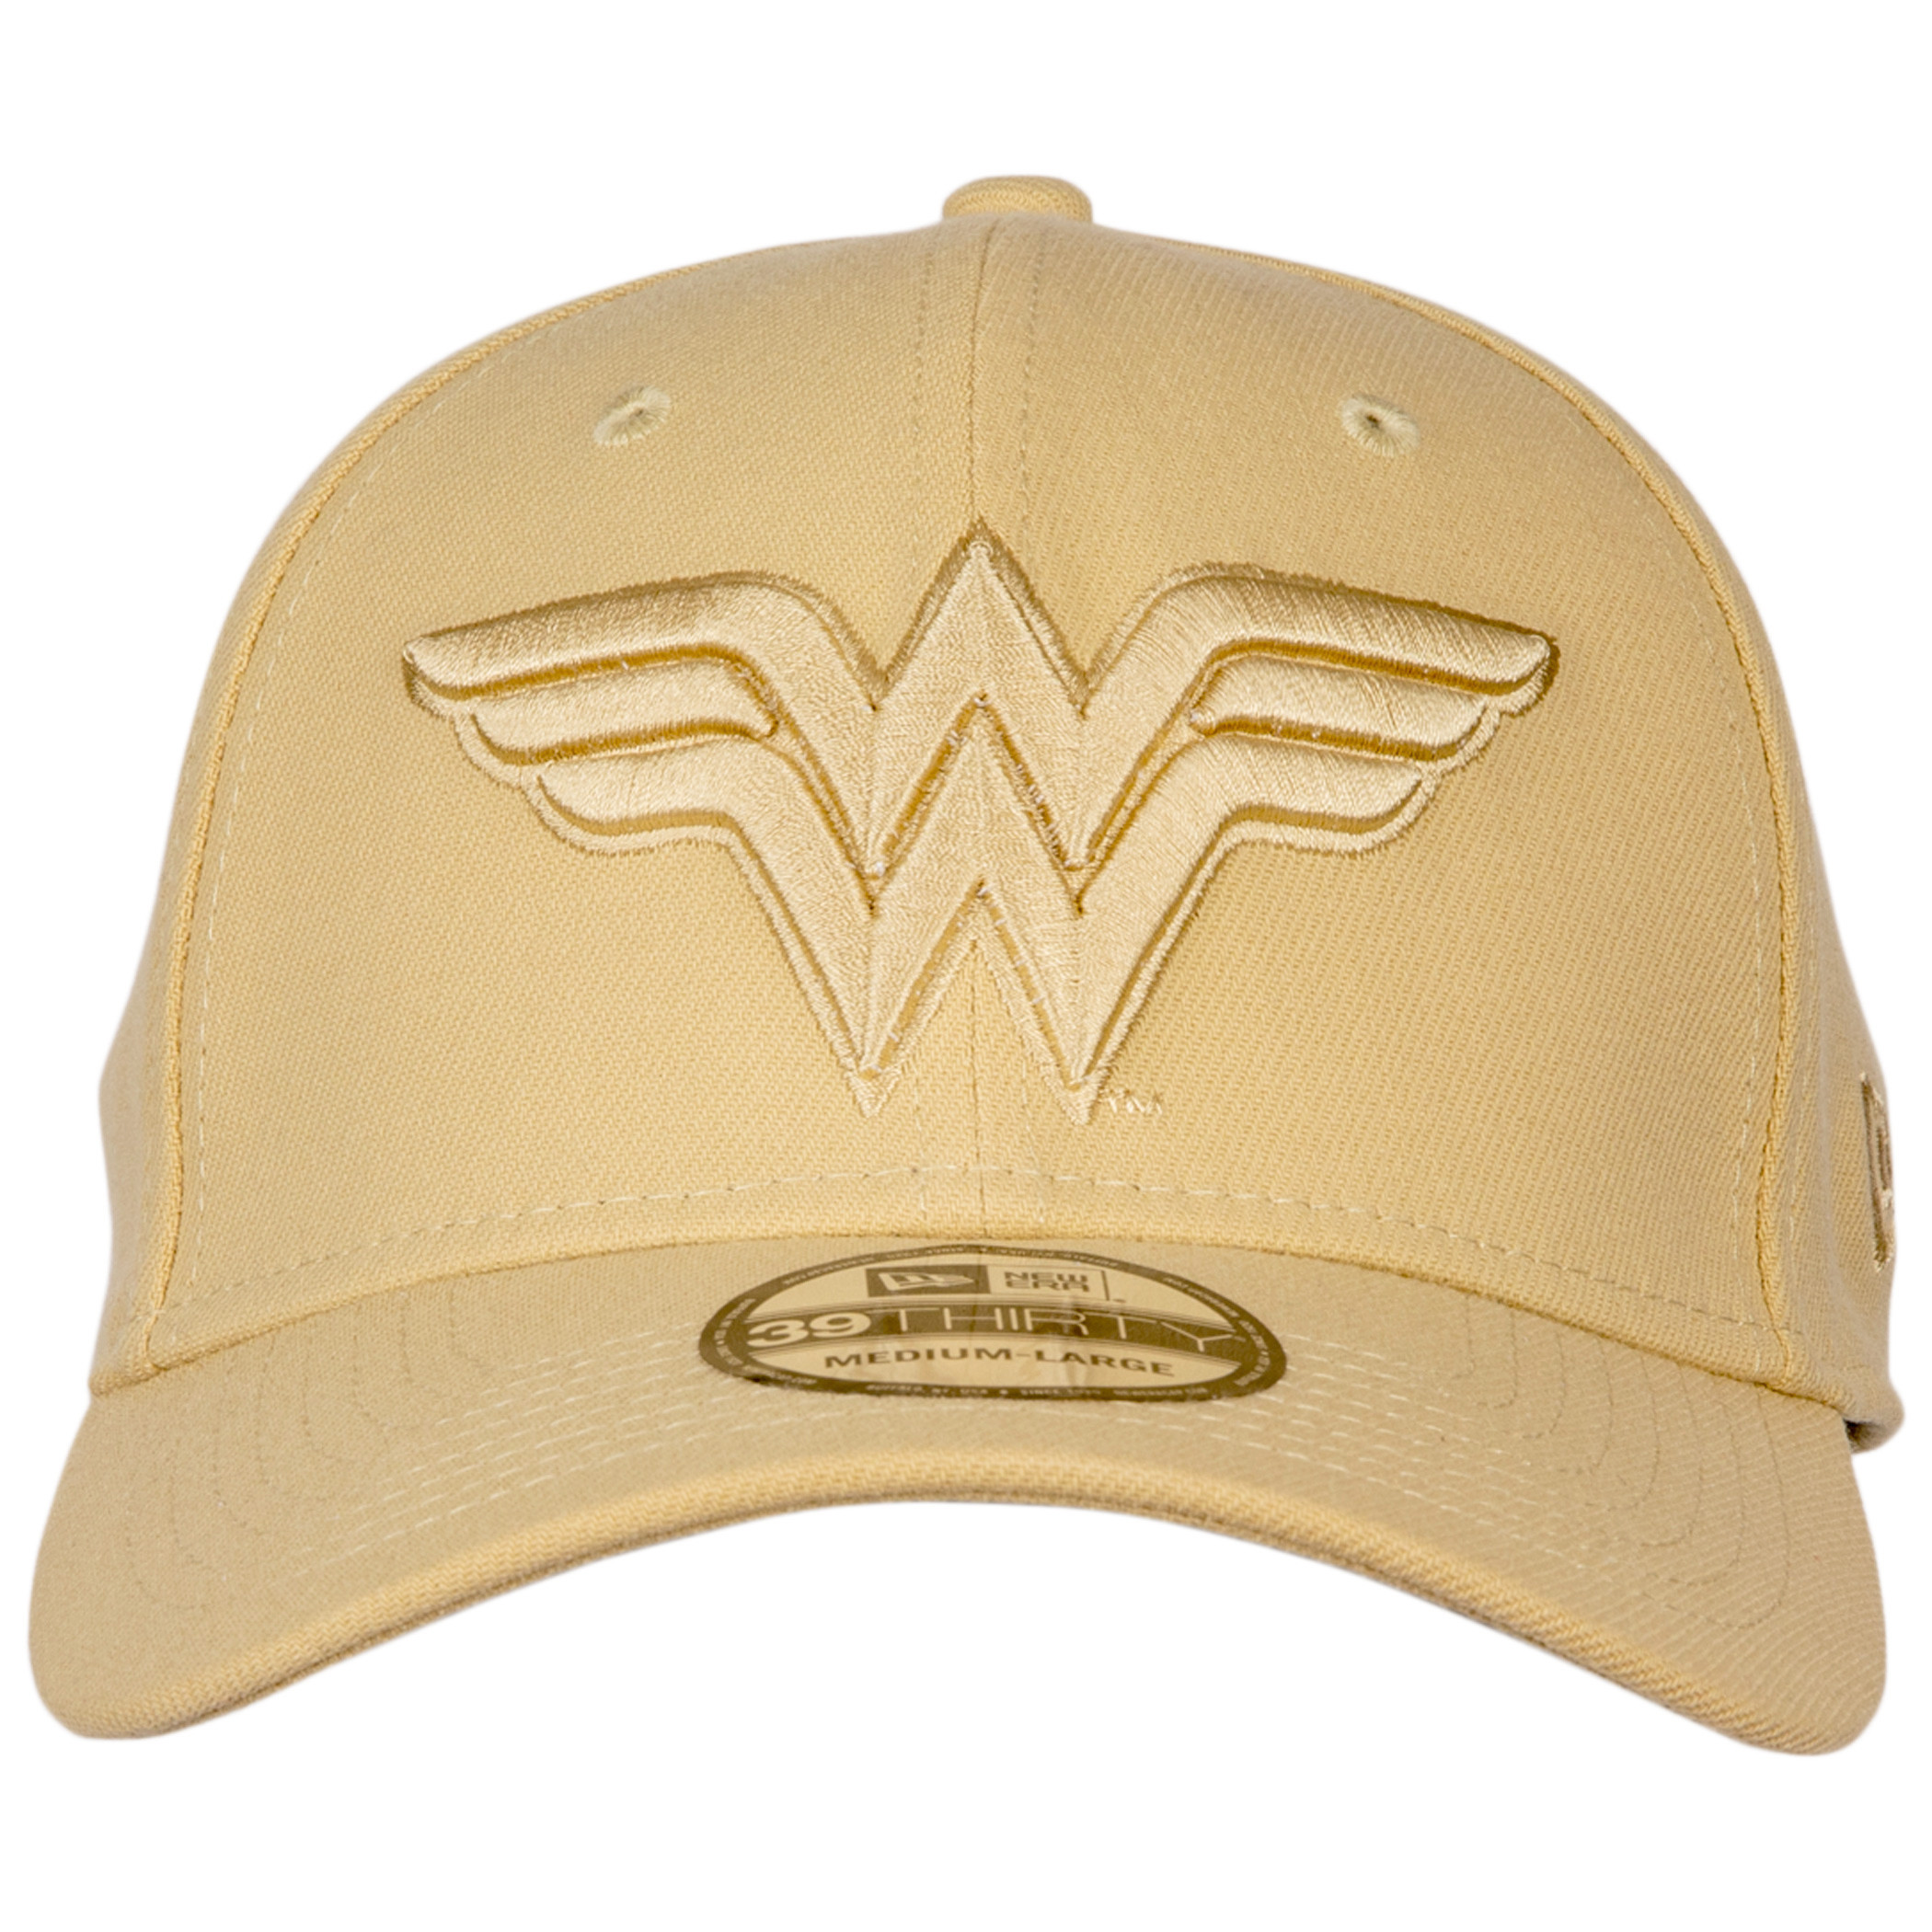 Wonder Woman 1984 Movie Gold Symbol on Gold Armor New Era 39Thirty Fitted Hat